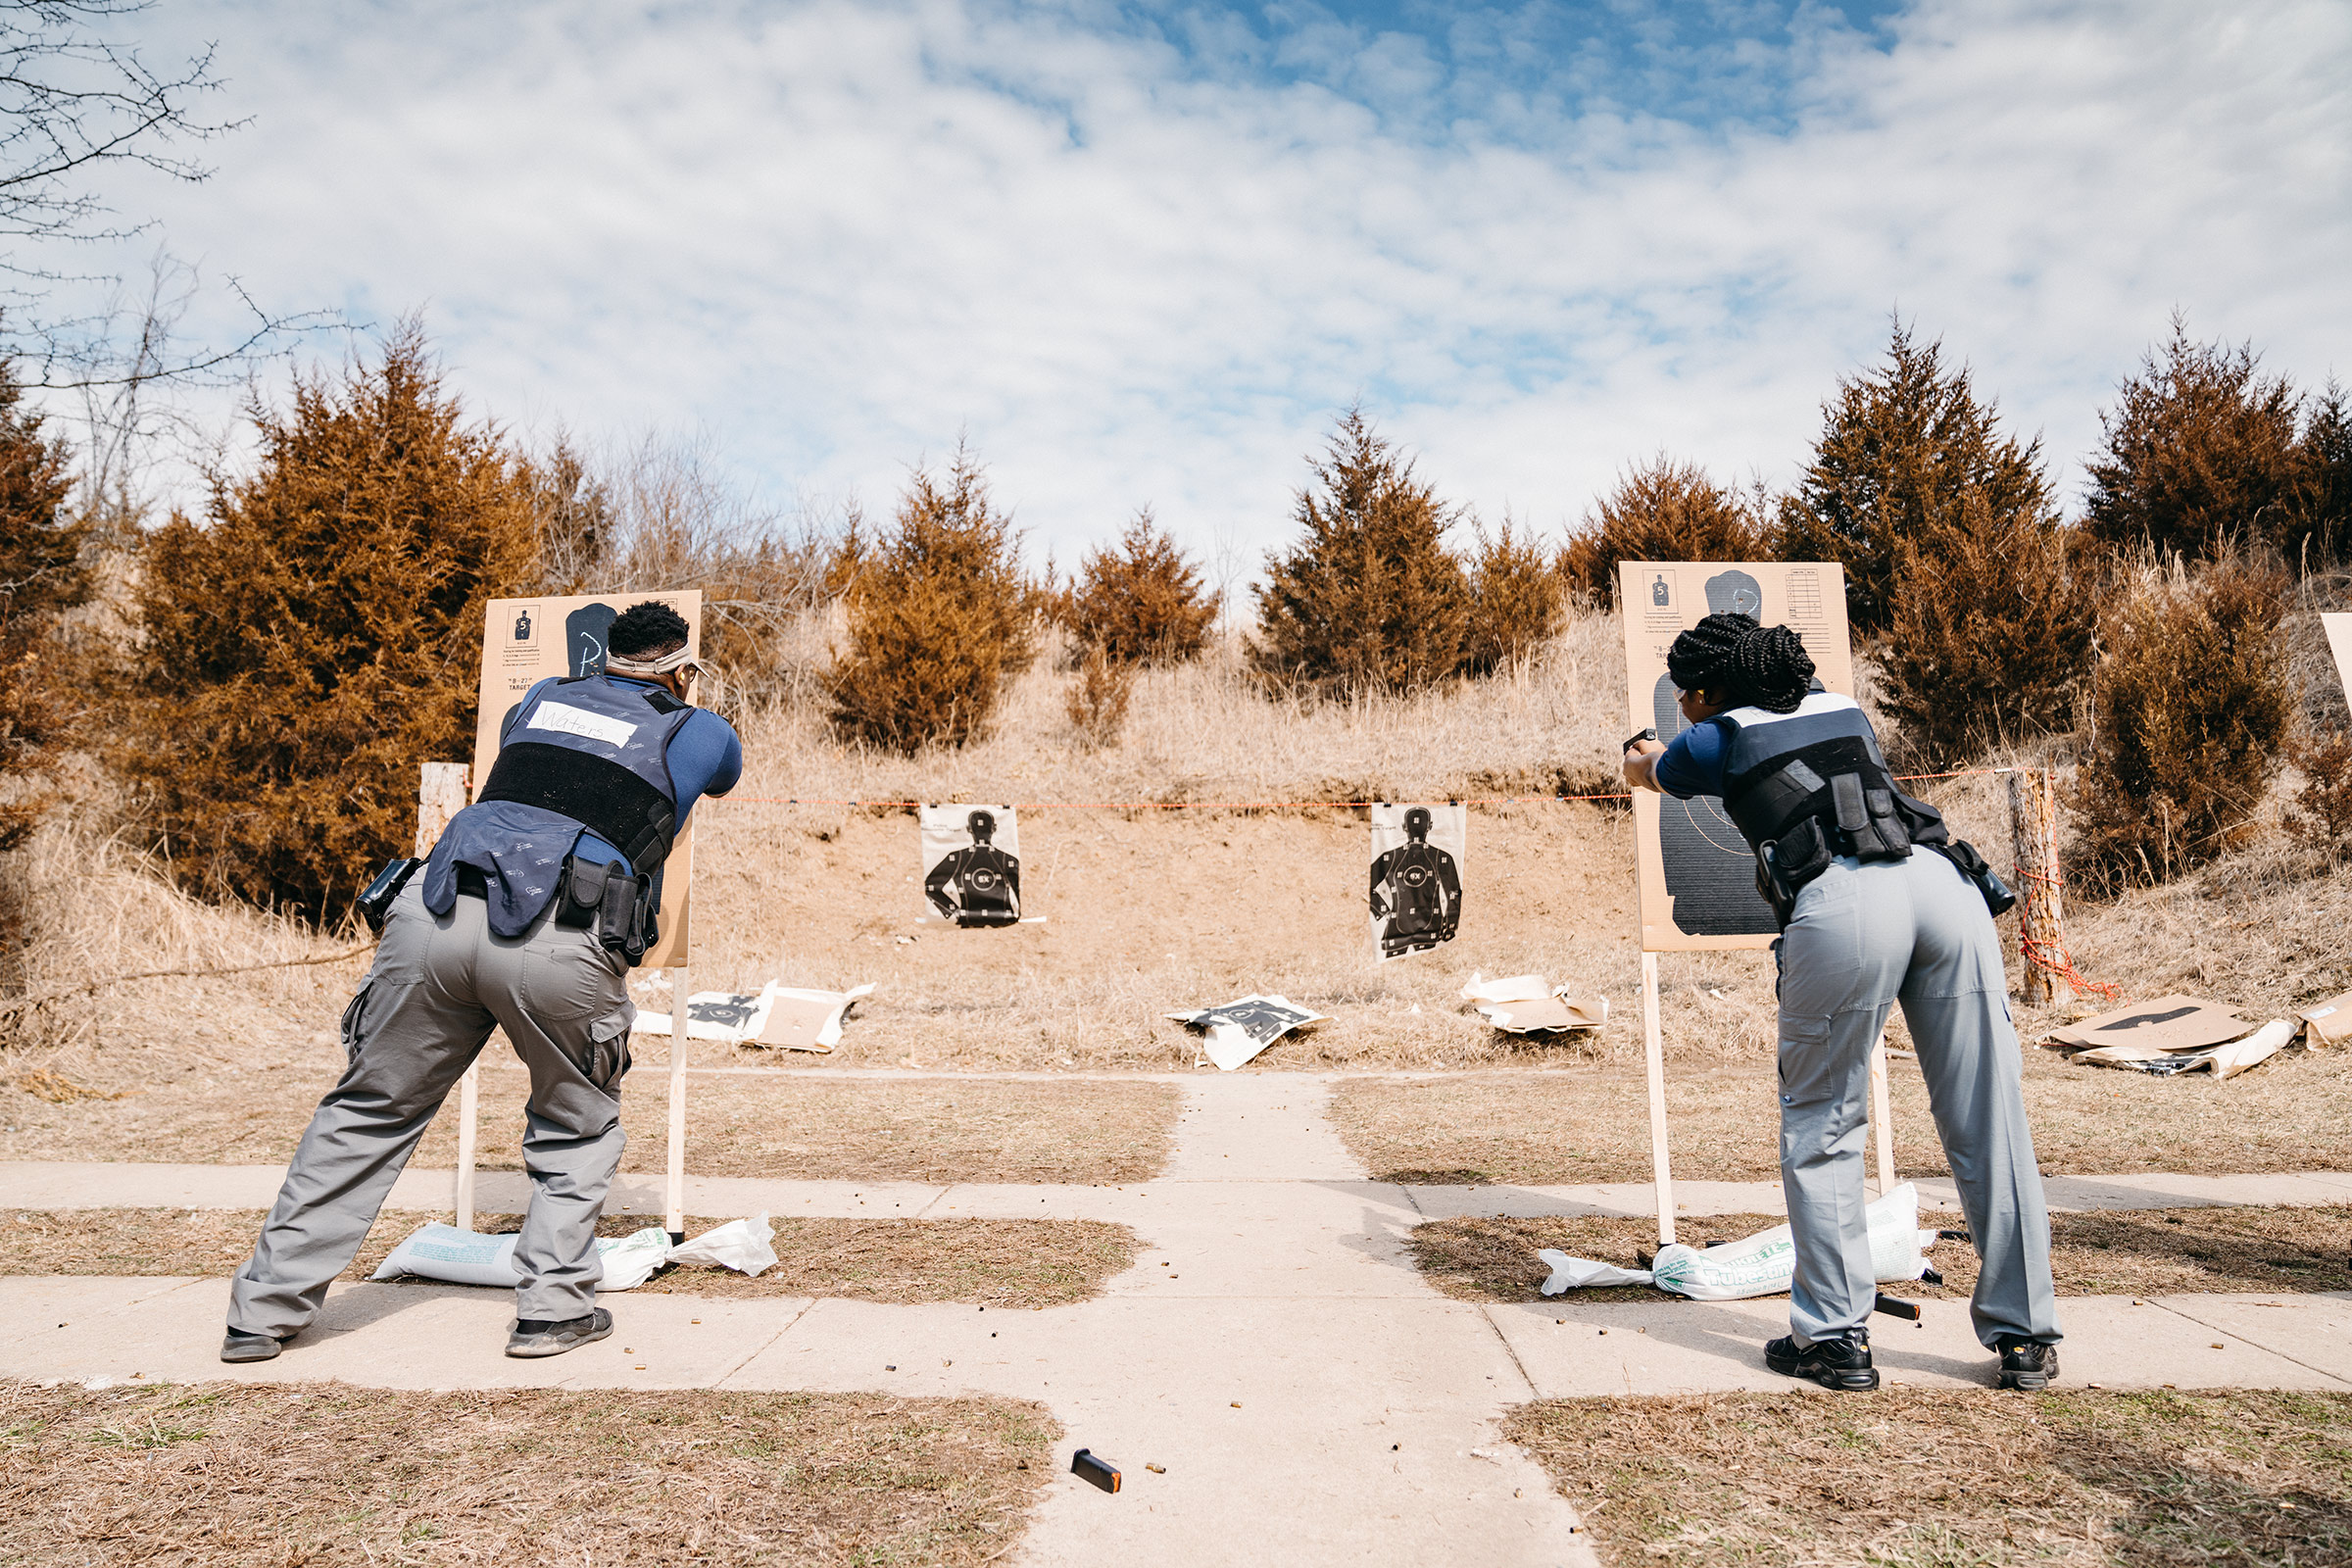 Two students during firearms <a href="https://time.com/5952208/hbcu-black-police-academy/">training</a> at a shooting range in Missouri on March 6. (Joe Martinez for TIME)